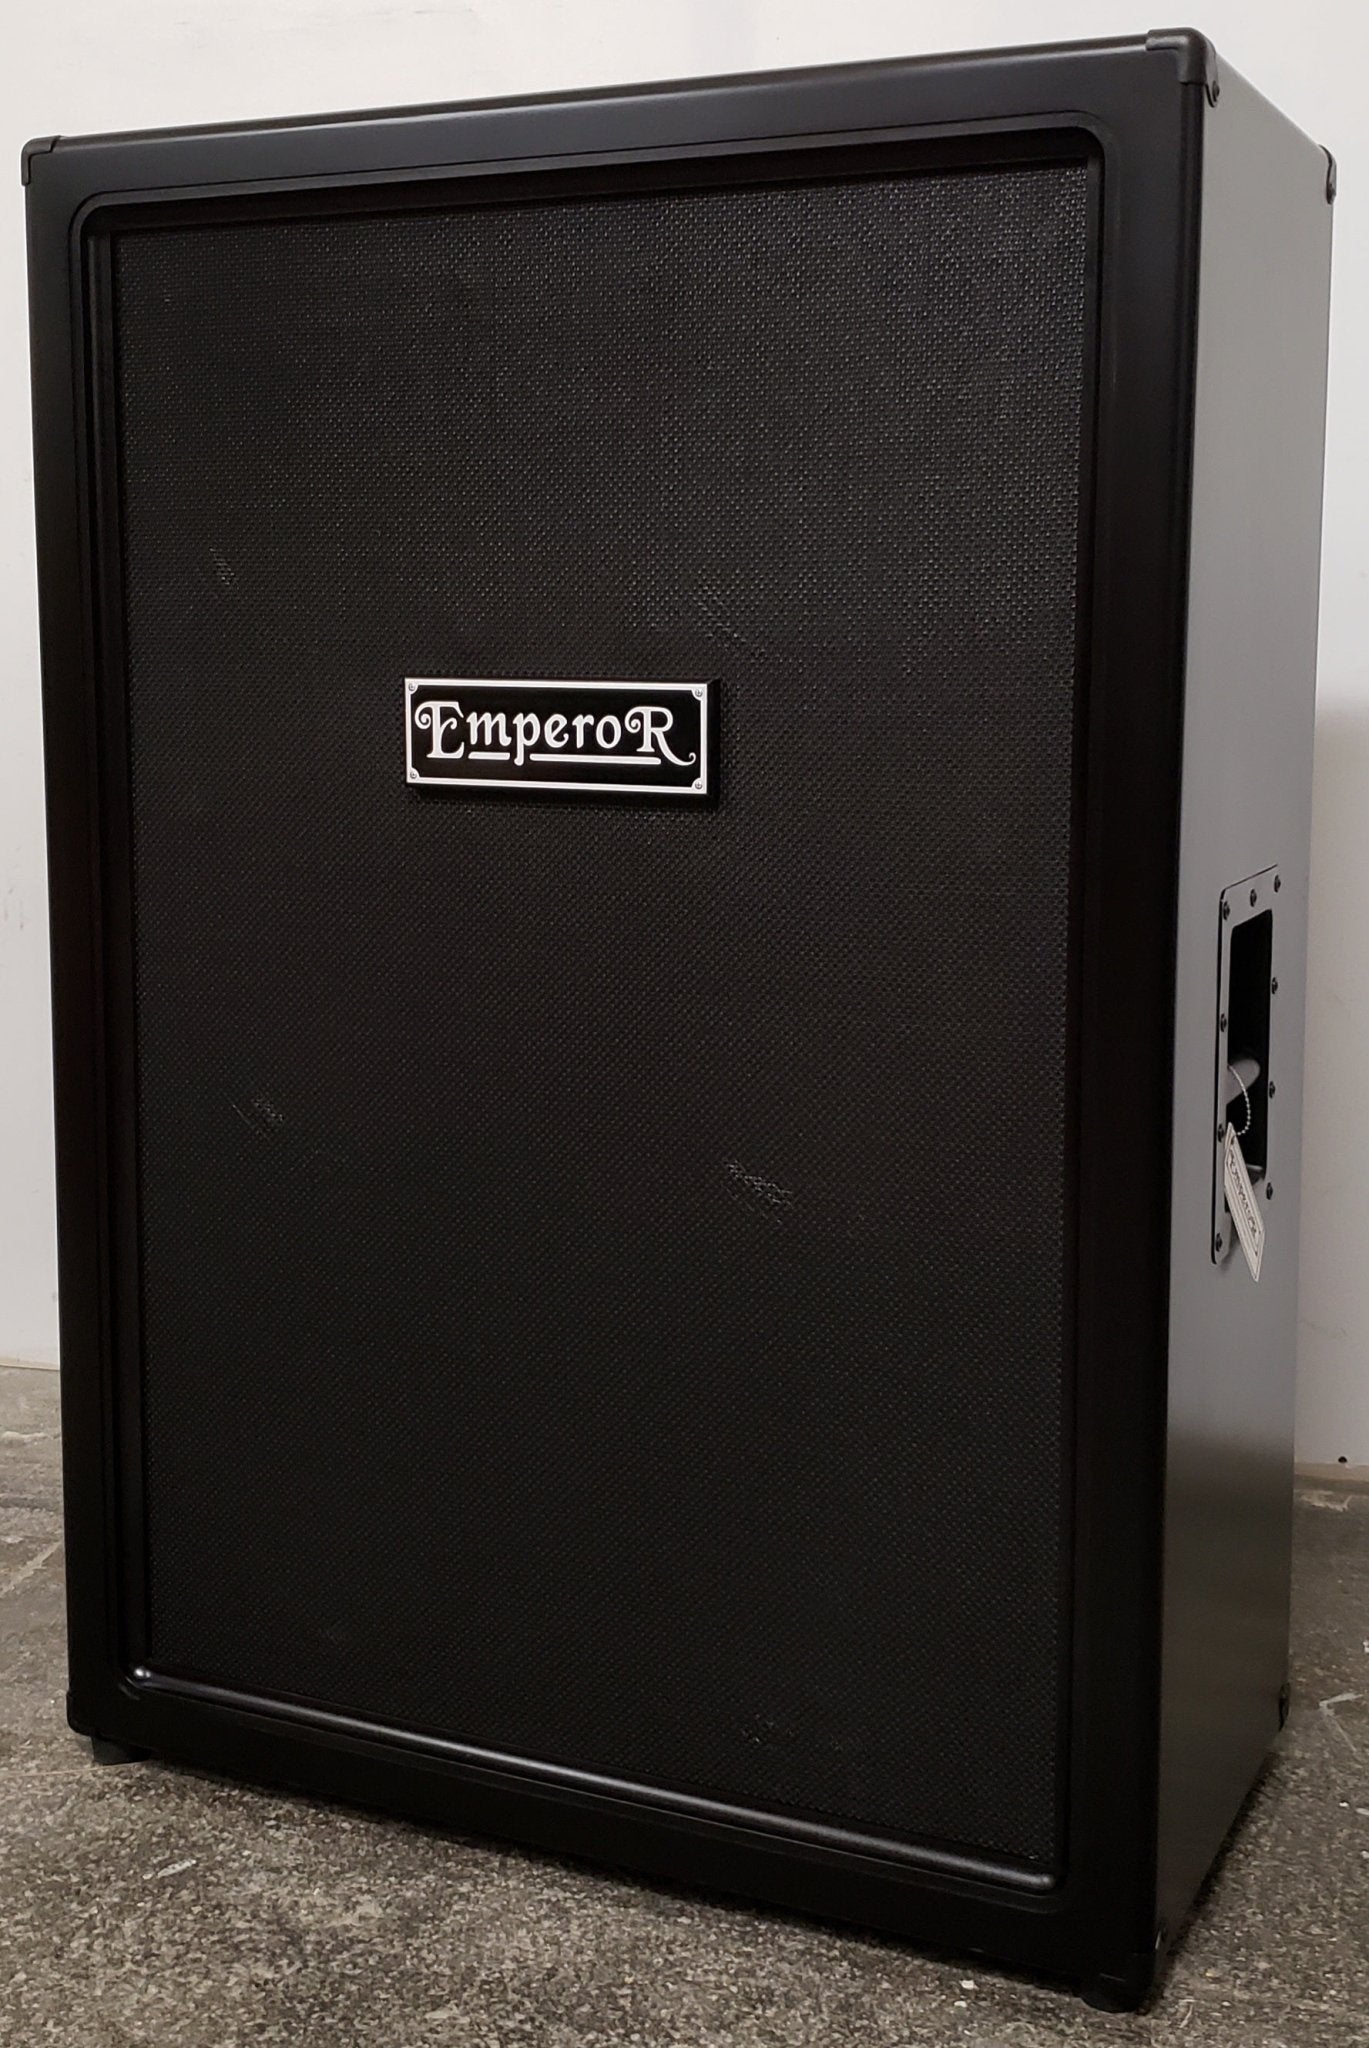 Blackened 6x12 RS Guitar Cabinet - Emperor Cabinets